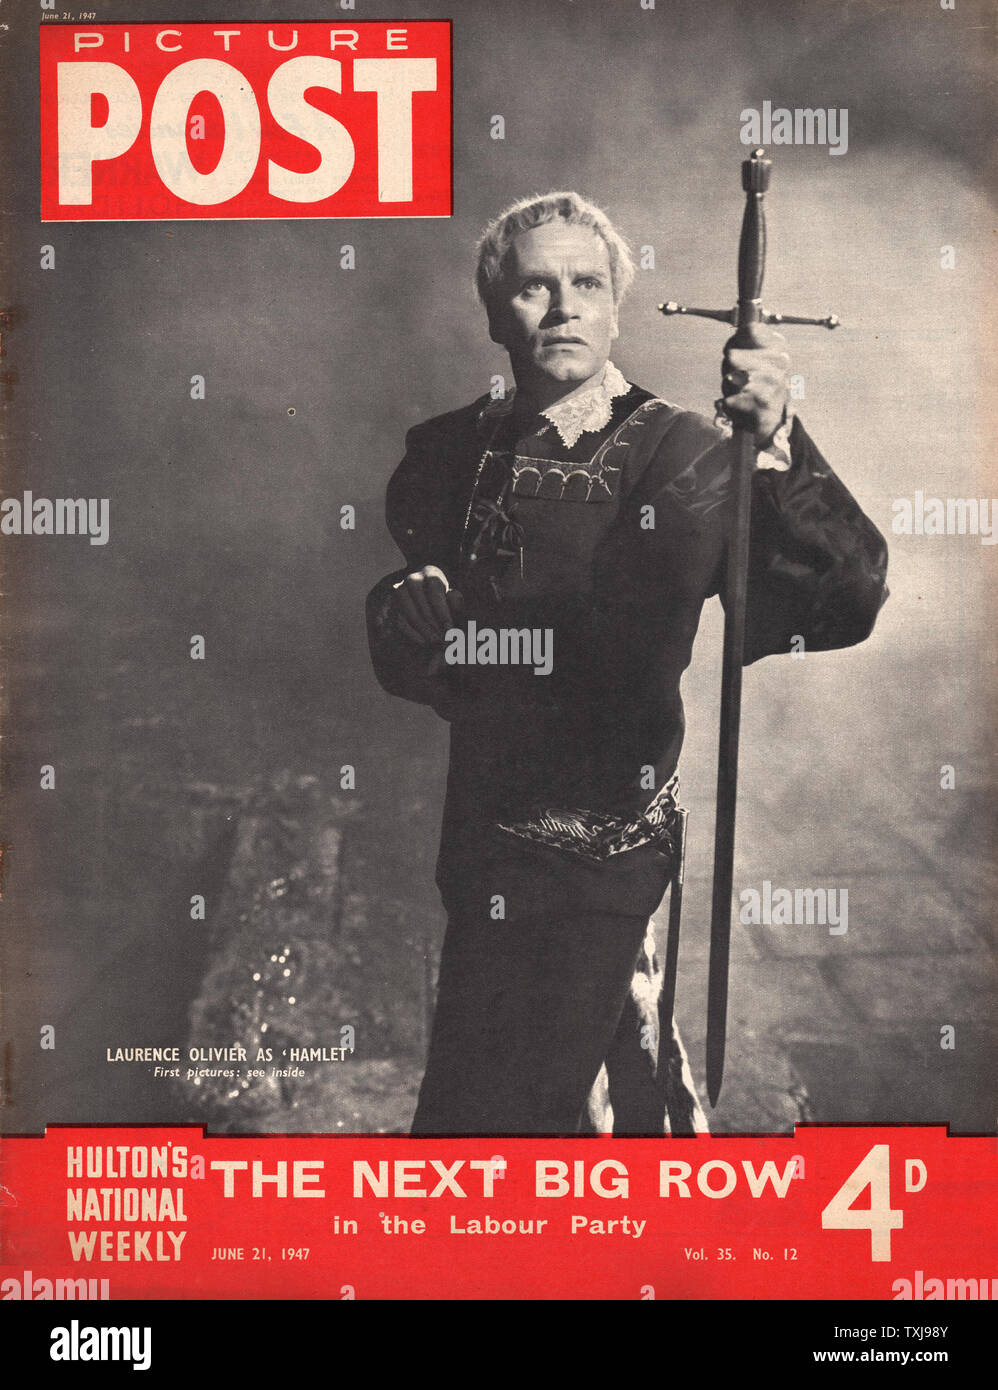 1947 Picture Post magazine front page showing actor Laurence Olivier playing 'Hamlet' Stock Photo